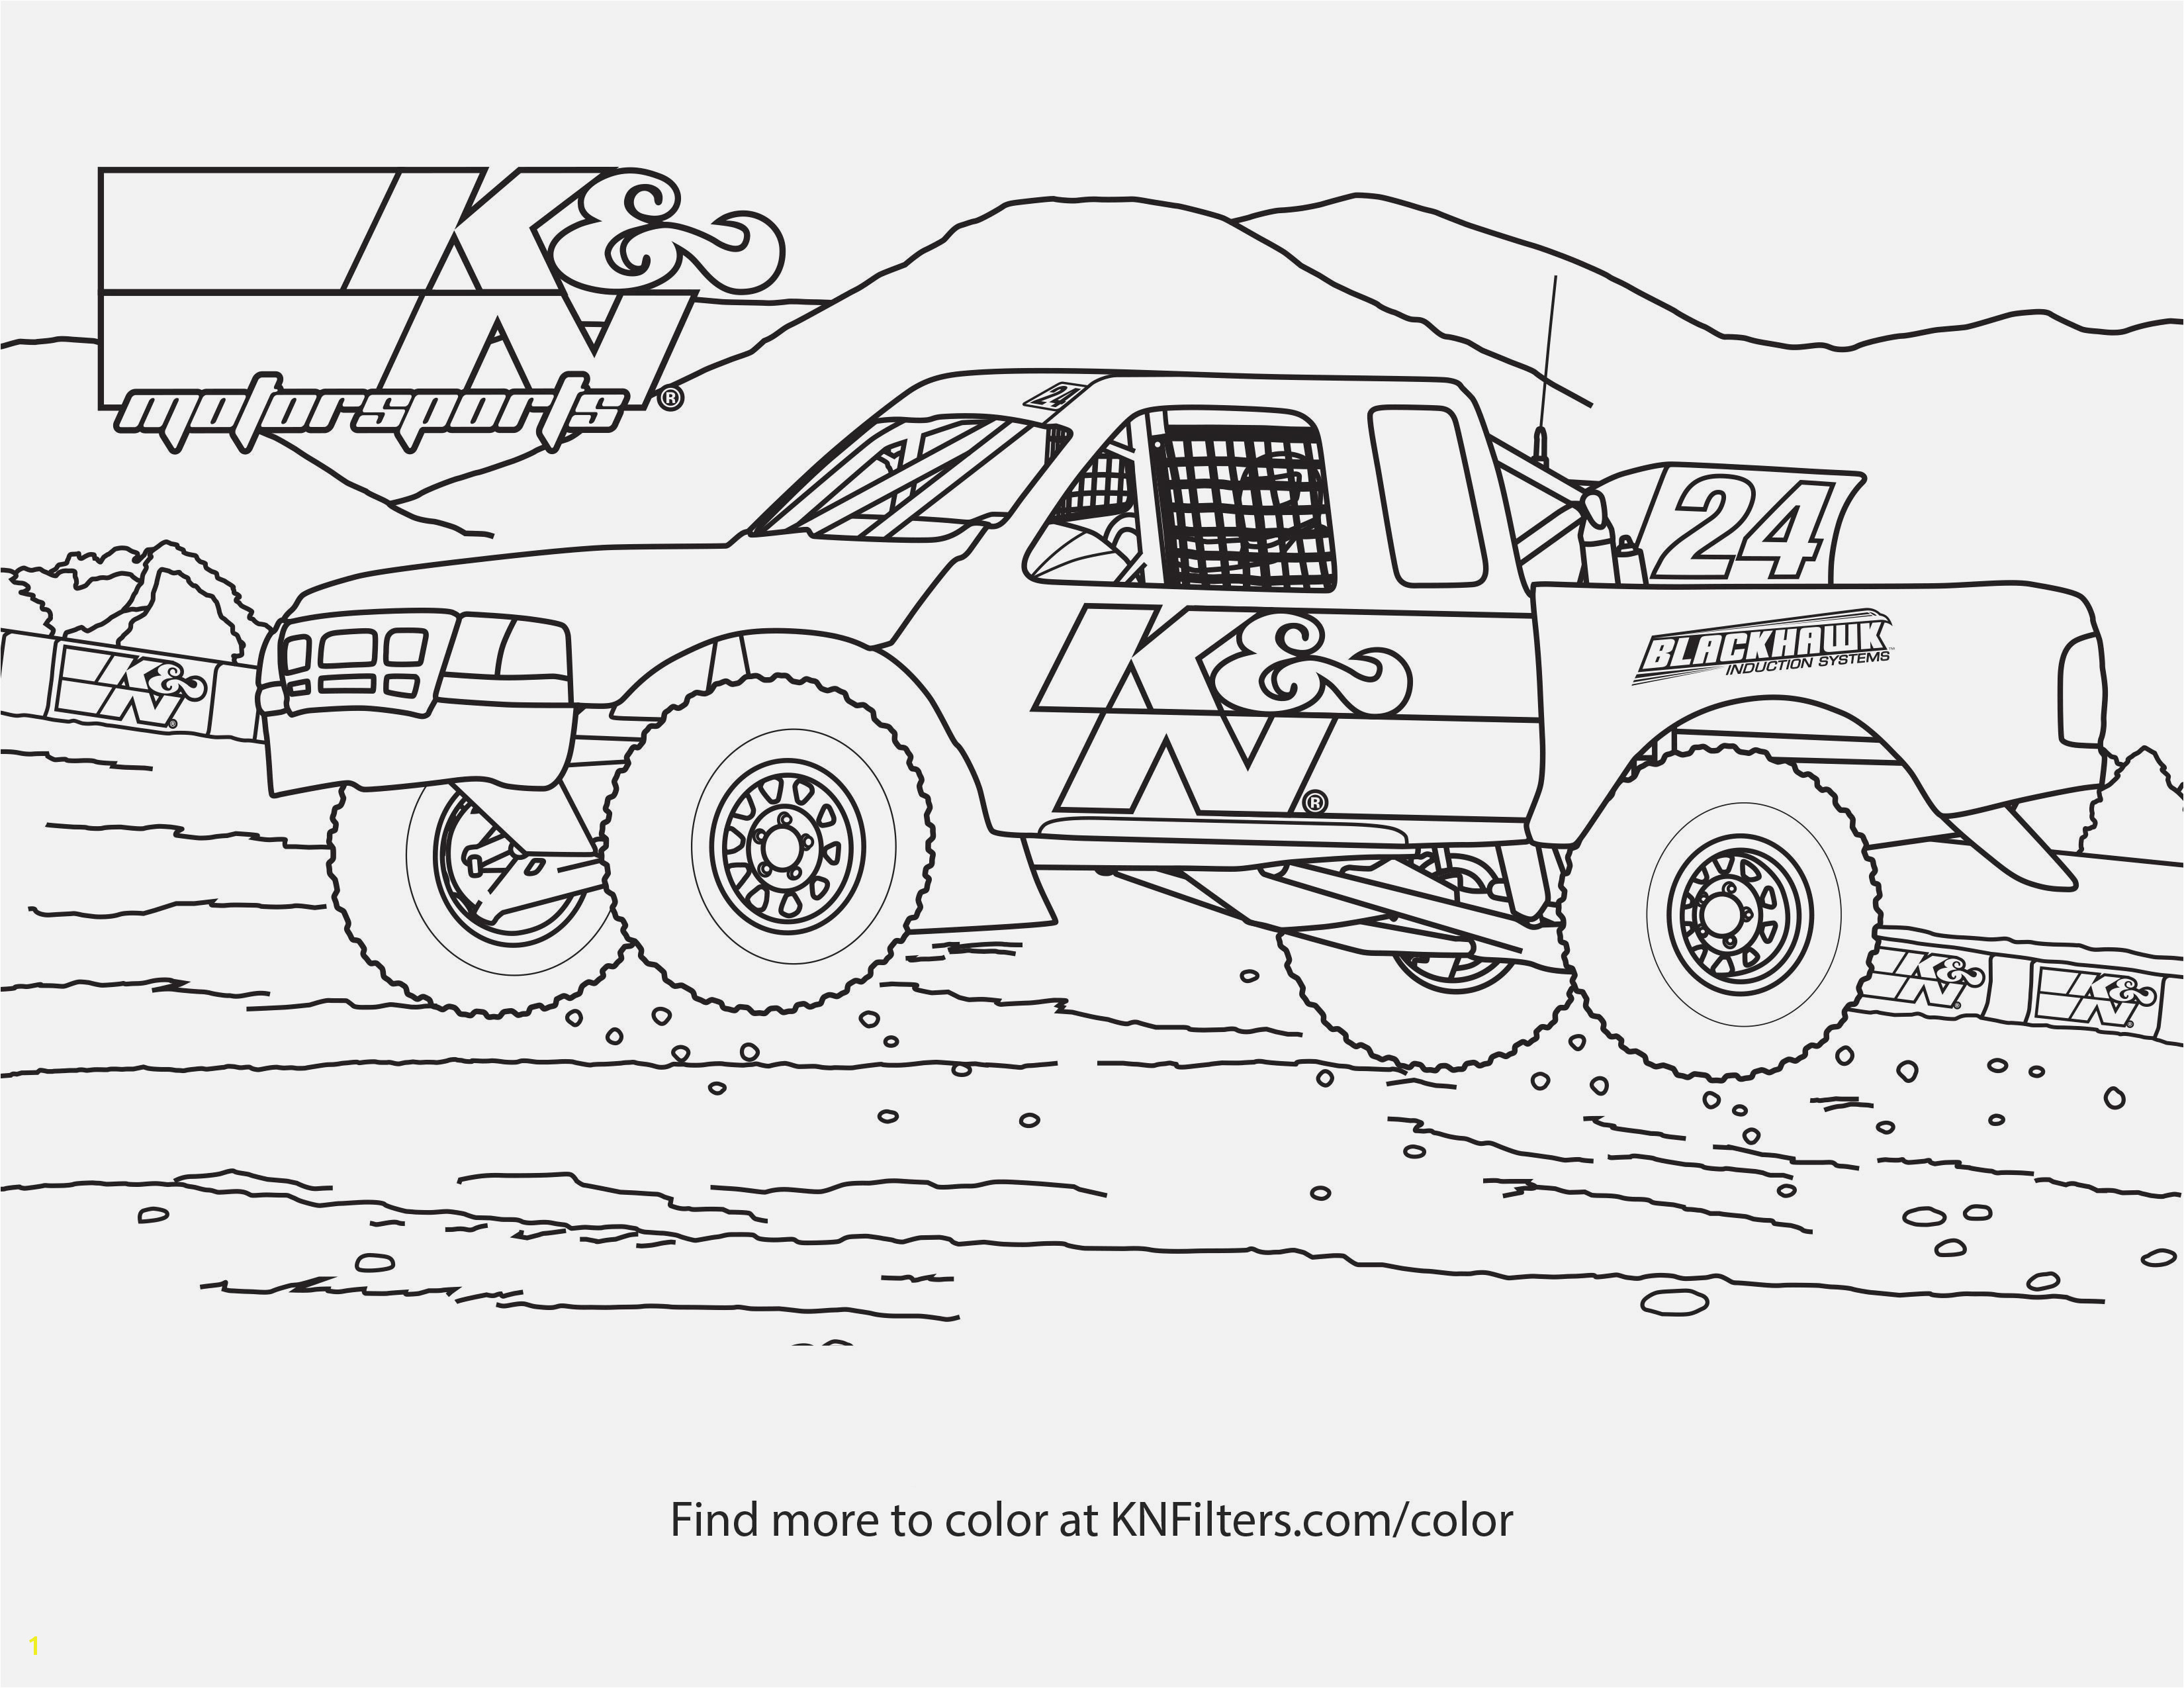 Dirt Bike Coloring Pages Easy and Fun K&n Printable Coloring Pages for Kids